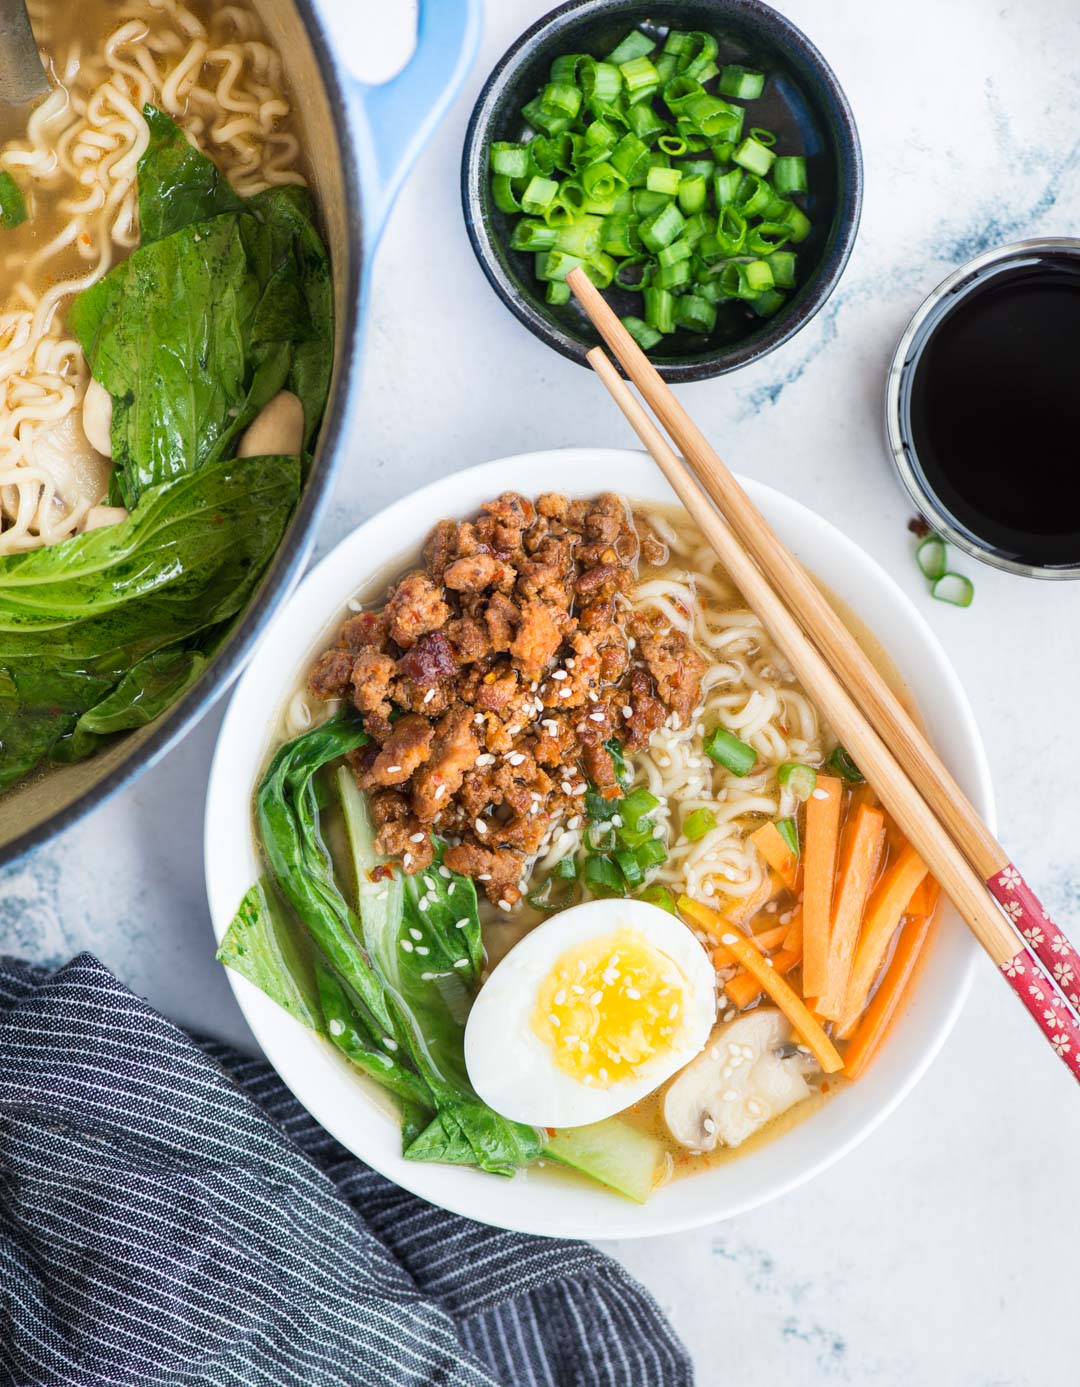 Spicy Pork Ramen takes less than 20 minutes to make. A really flavourful broth with a secret ingredient for extra depth of flavour, ramen noodles, spicy pork is comfort in a bowl, especially for cold winter days.